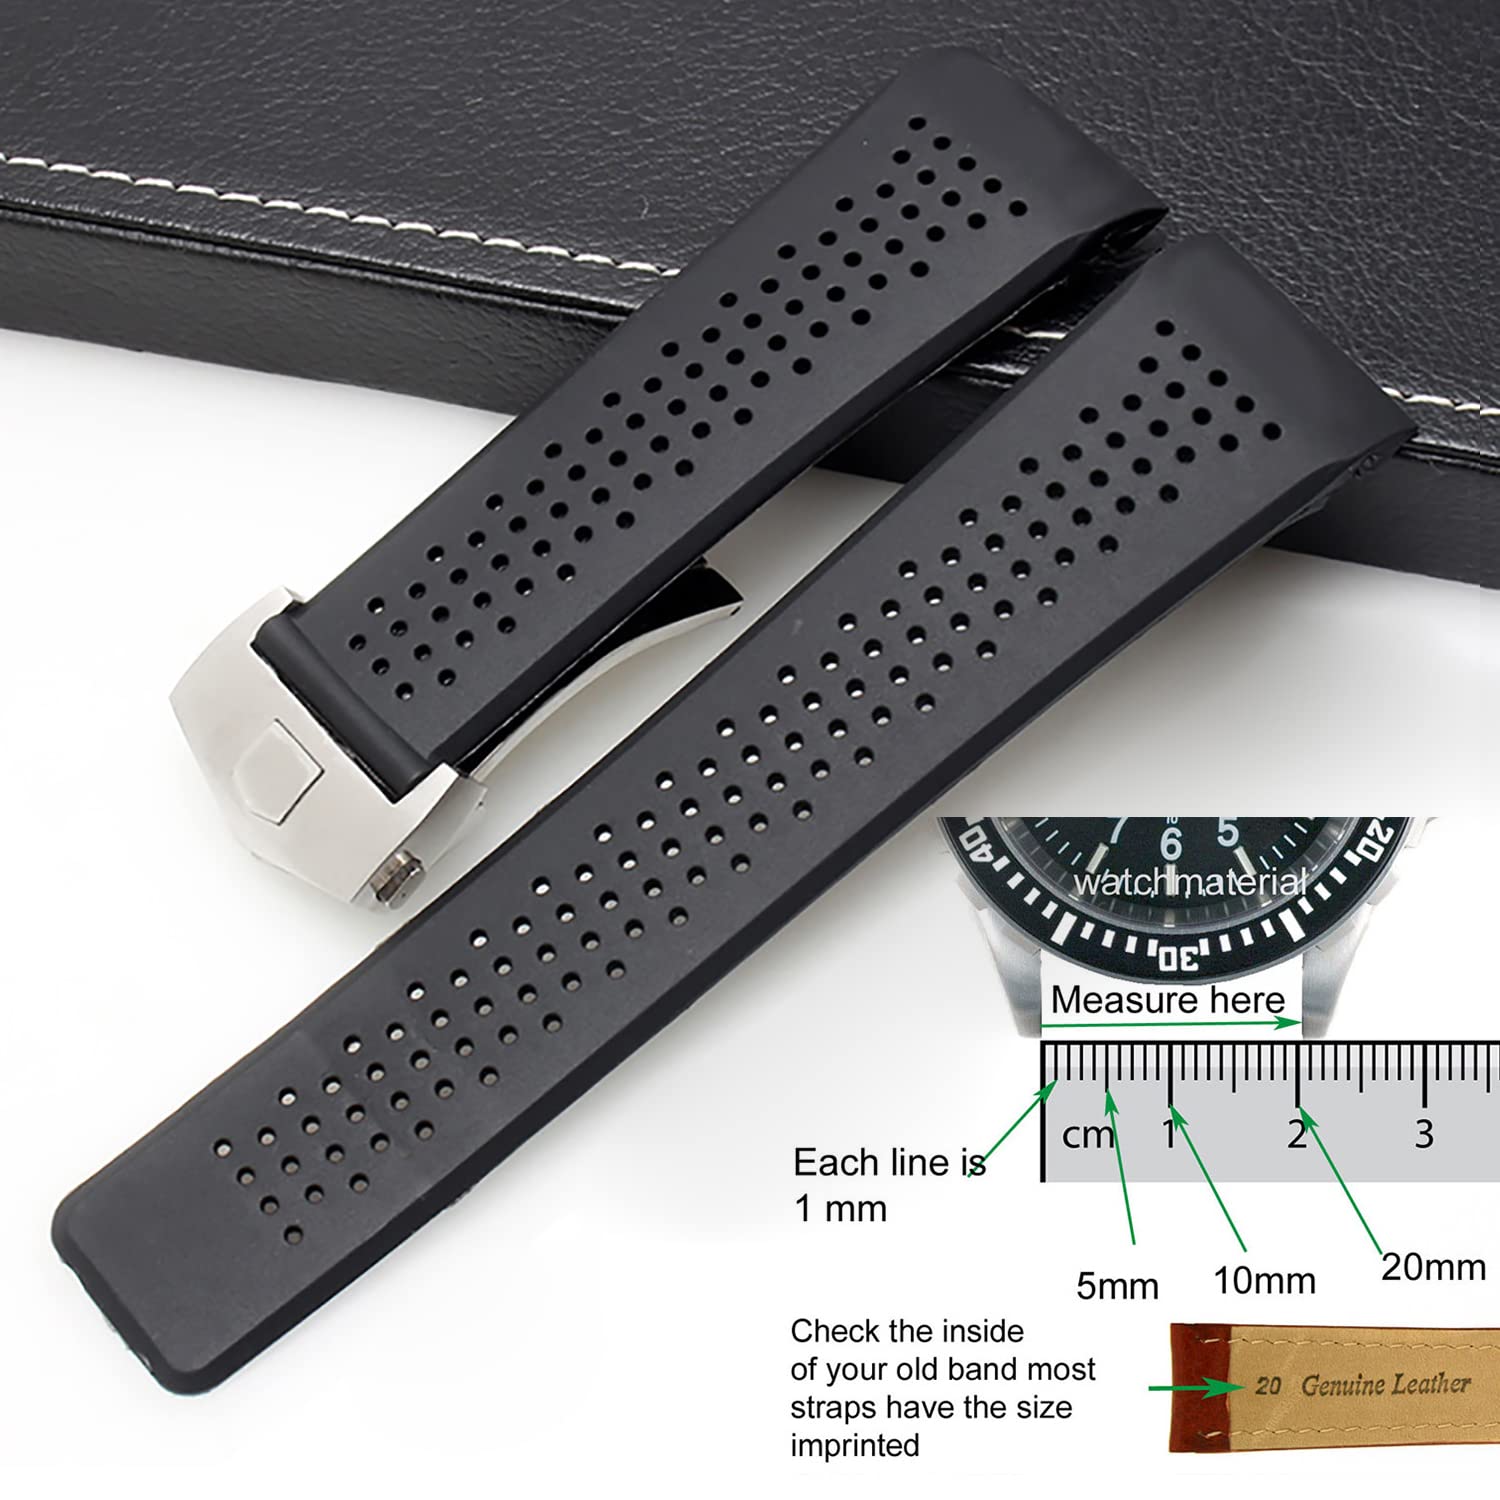 Nice Pies Men Soft Silicone Watch Band Military Strong Rubber Replacement Watch Strap with Stainless Steel Button Folding Table Buckle Waterproof Sport Wristband Black 22mm/24mm